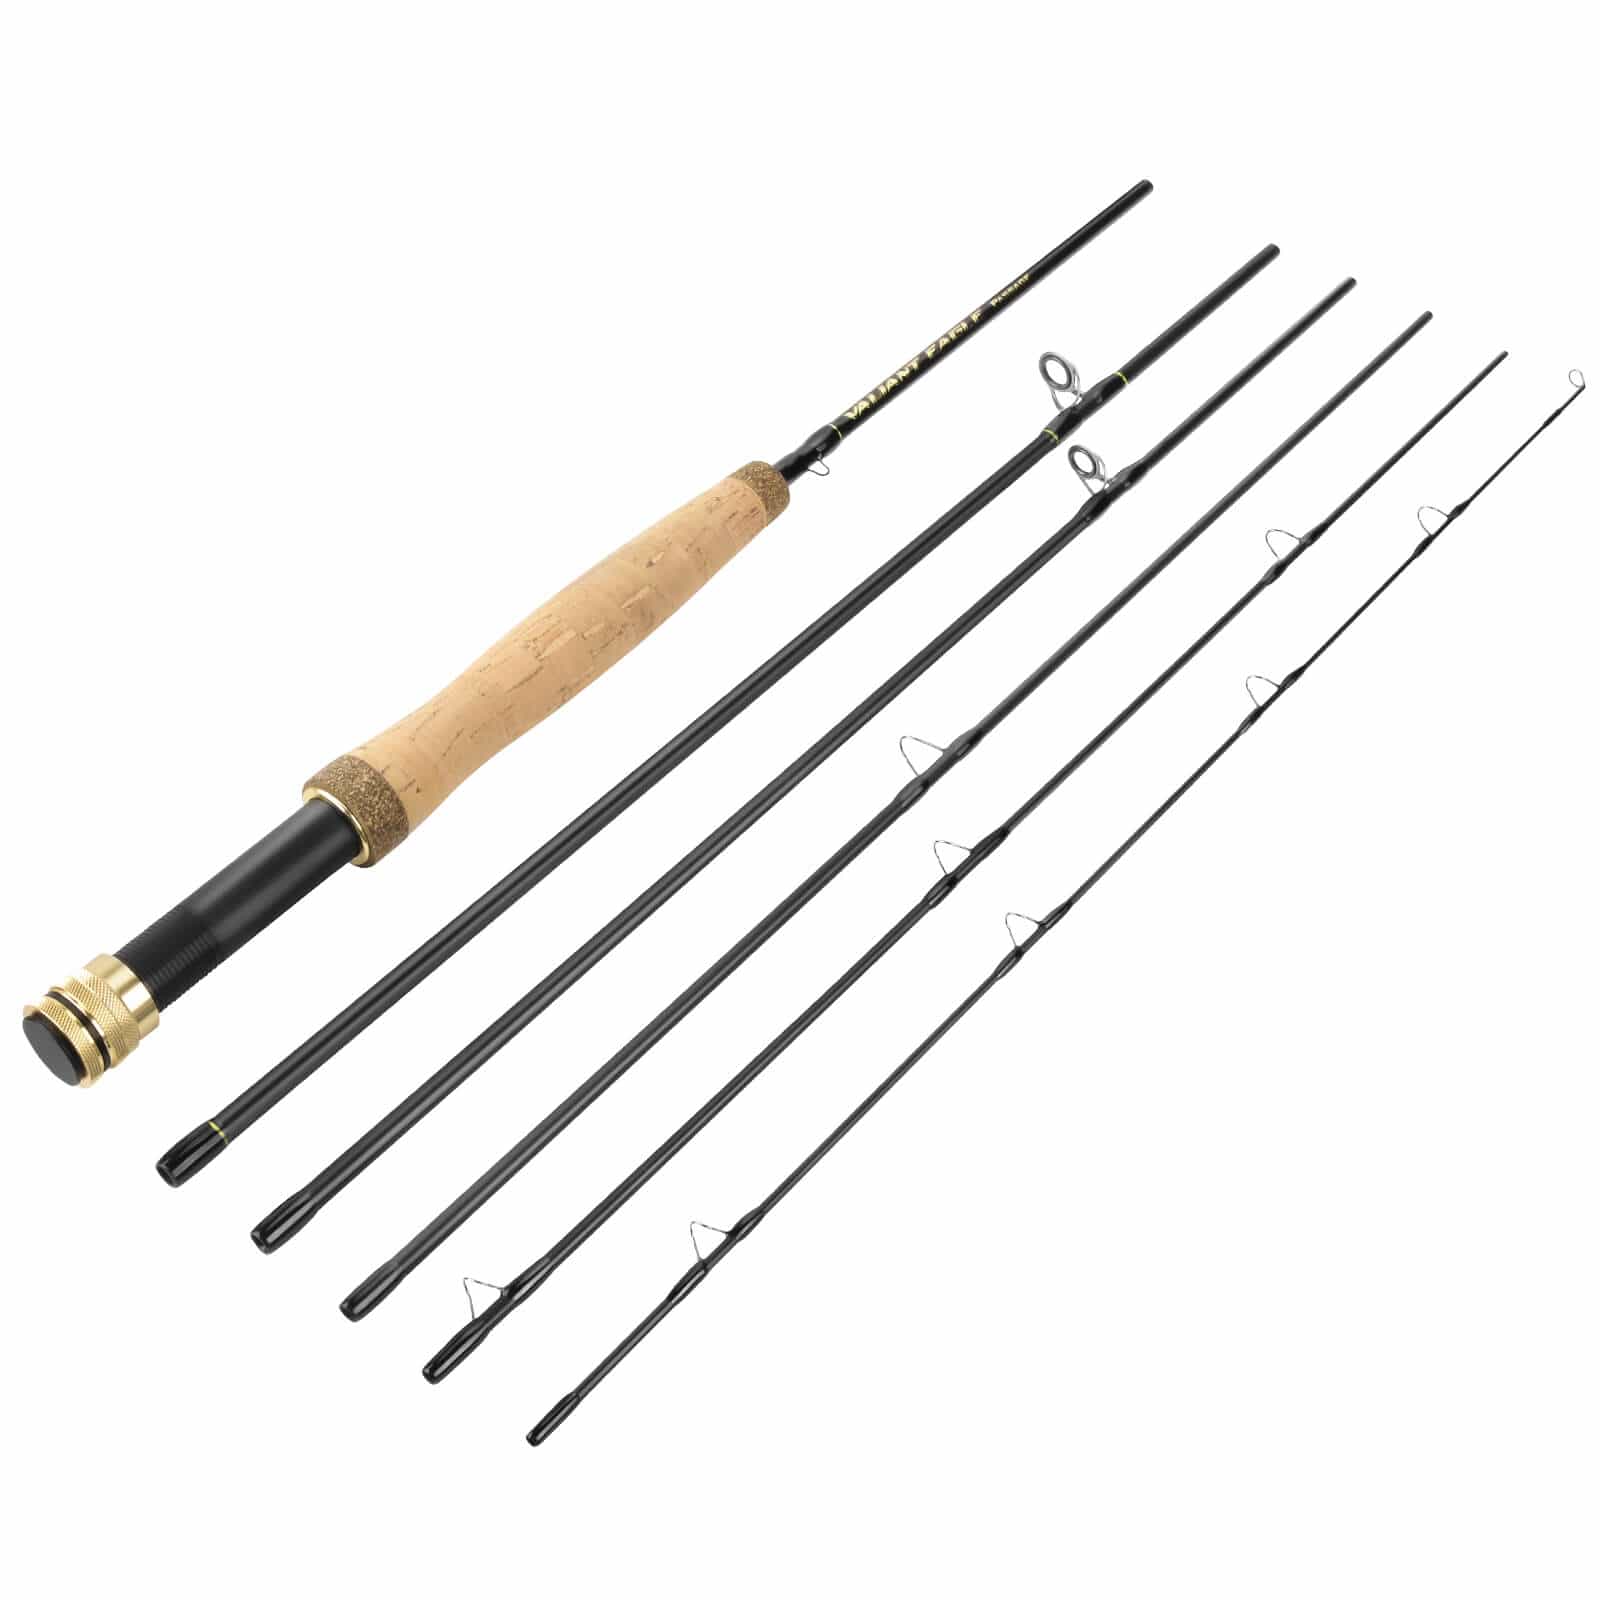 Native trout style rod for small bass and panfish? - TackleTour